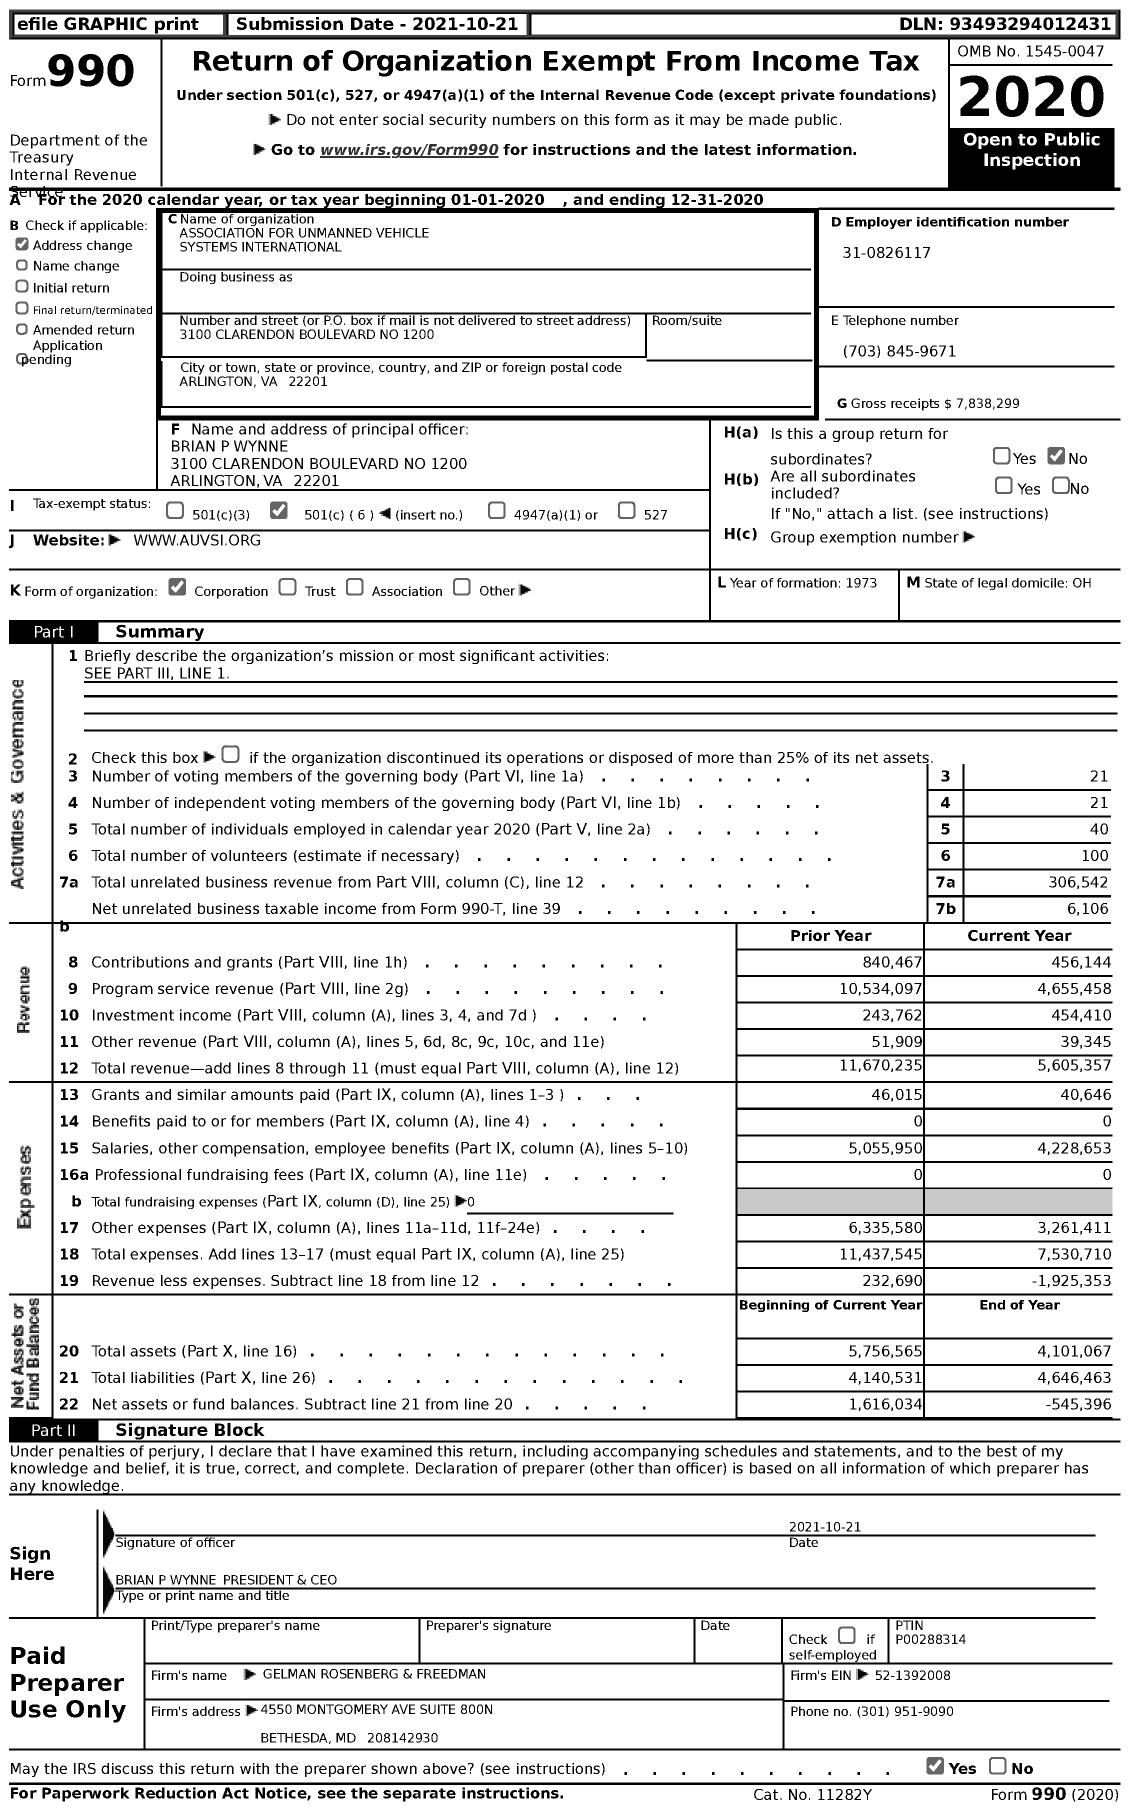 Image of first page of 2020 Form 990 for Association for Uncrewed Vehicle Systems International (AUVSI)